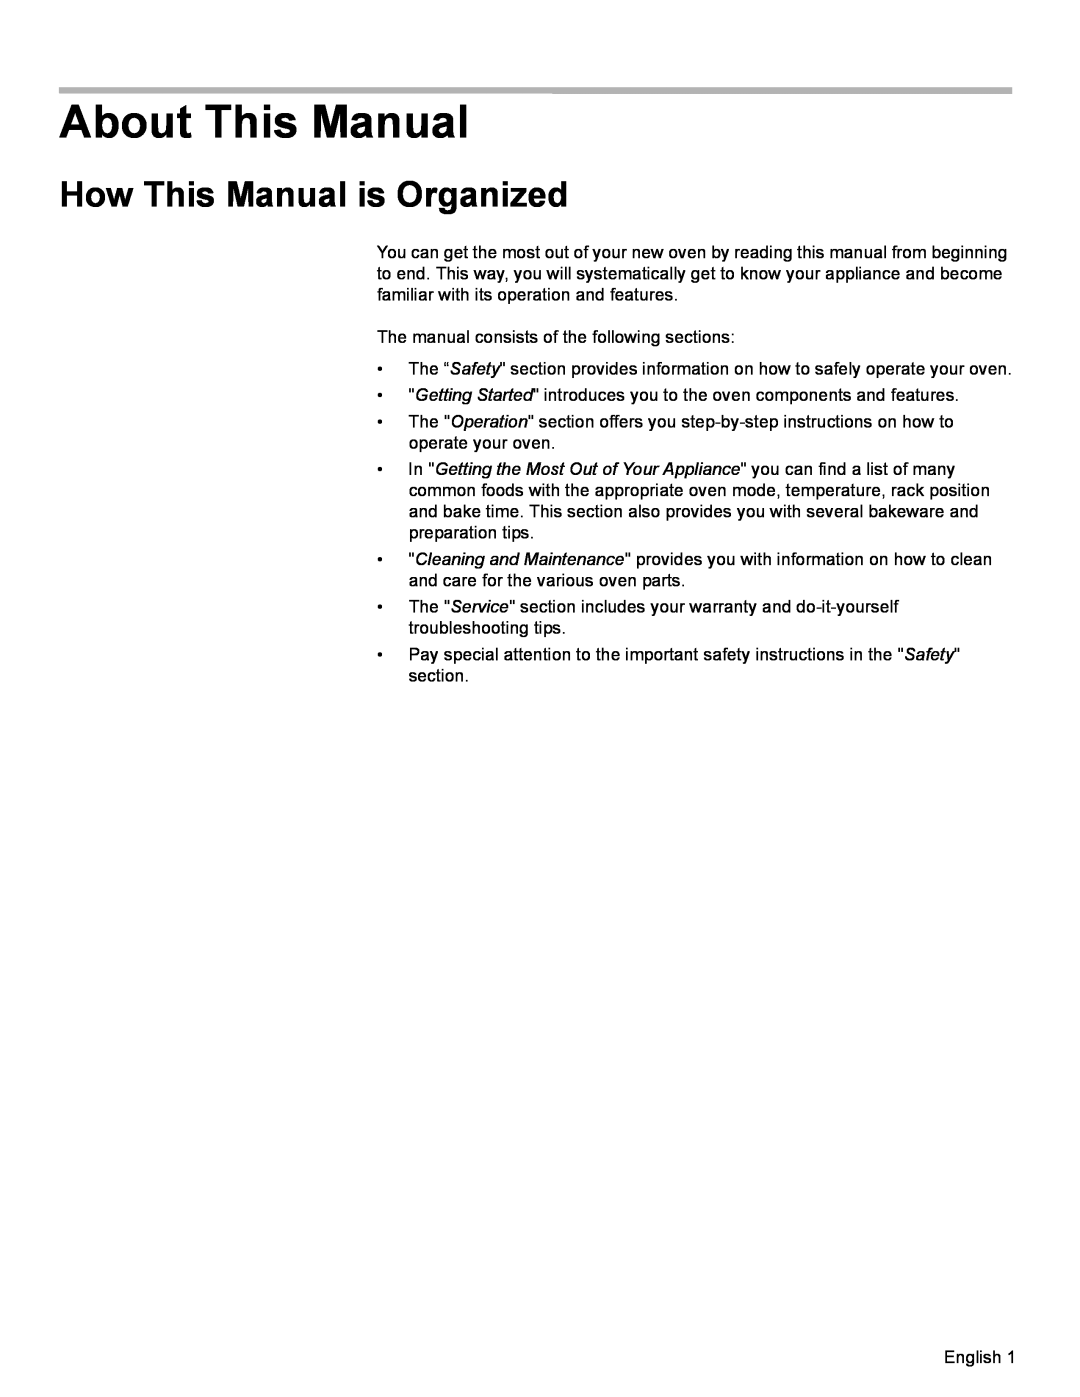 Bosch Appliances HBL35, HBN34, HBN35 manual About This Manual, How This Manual is Organized 